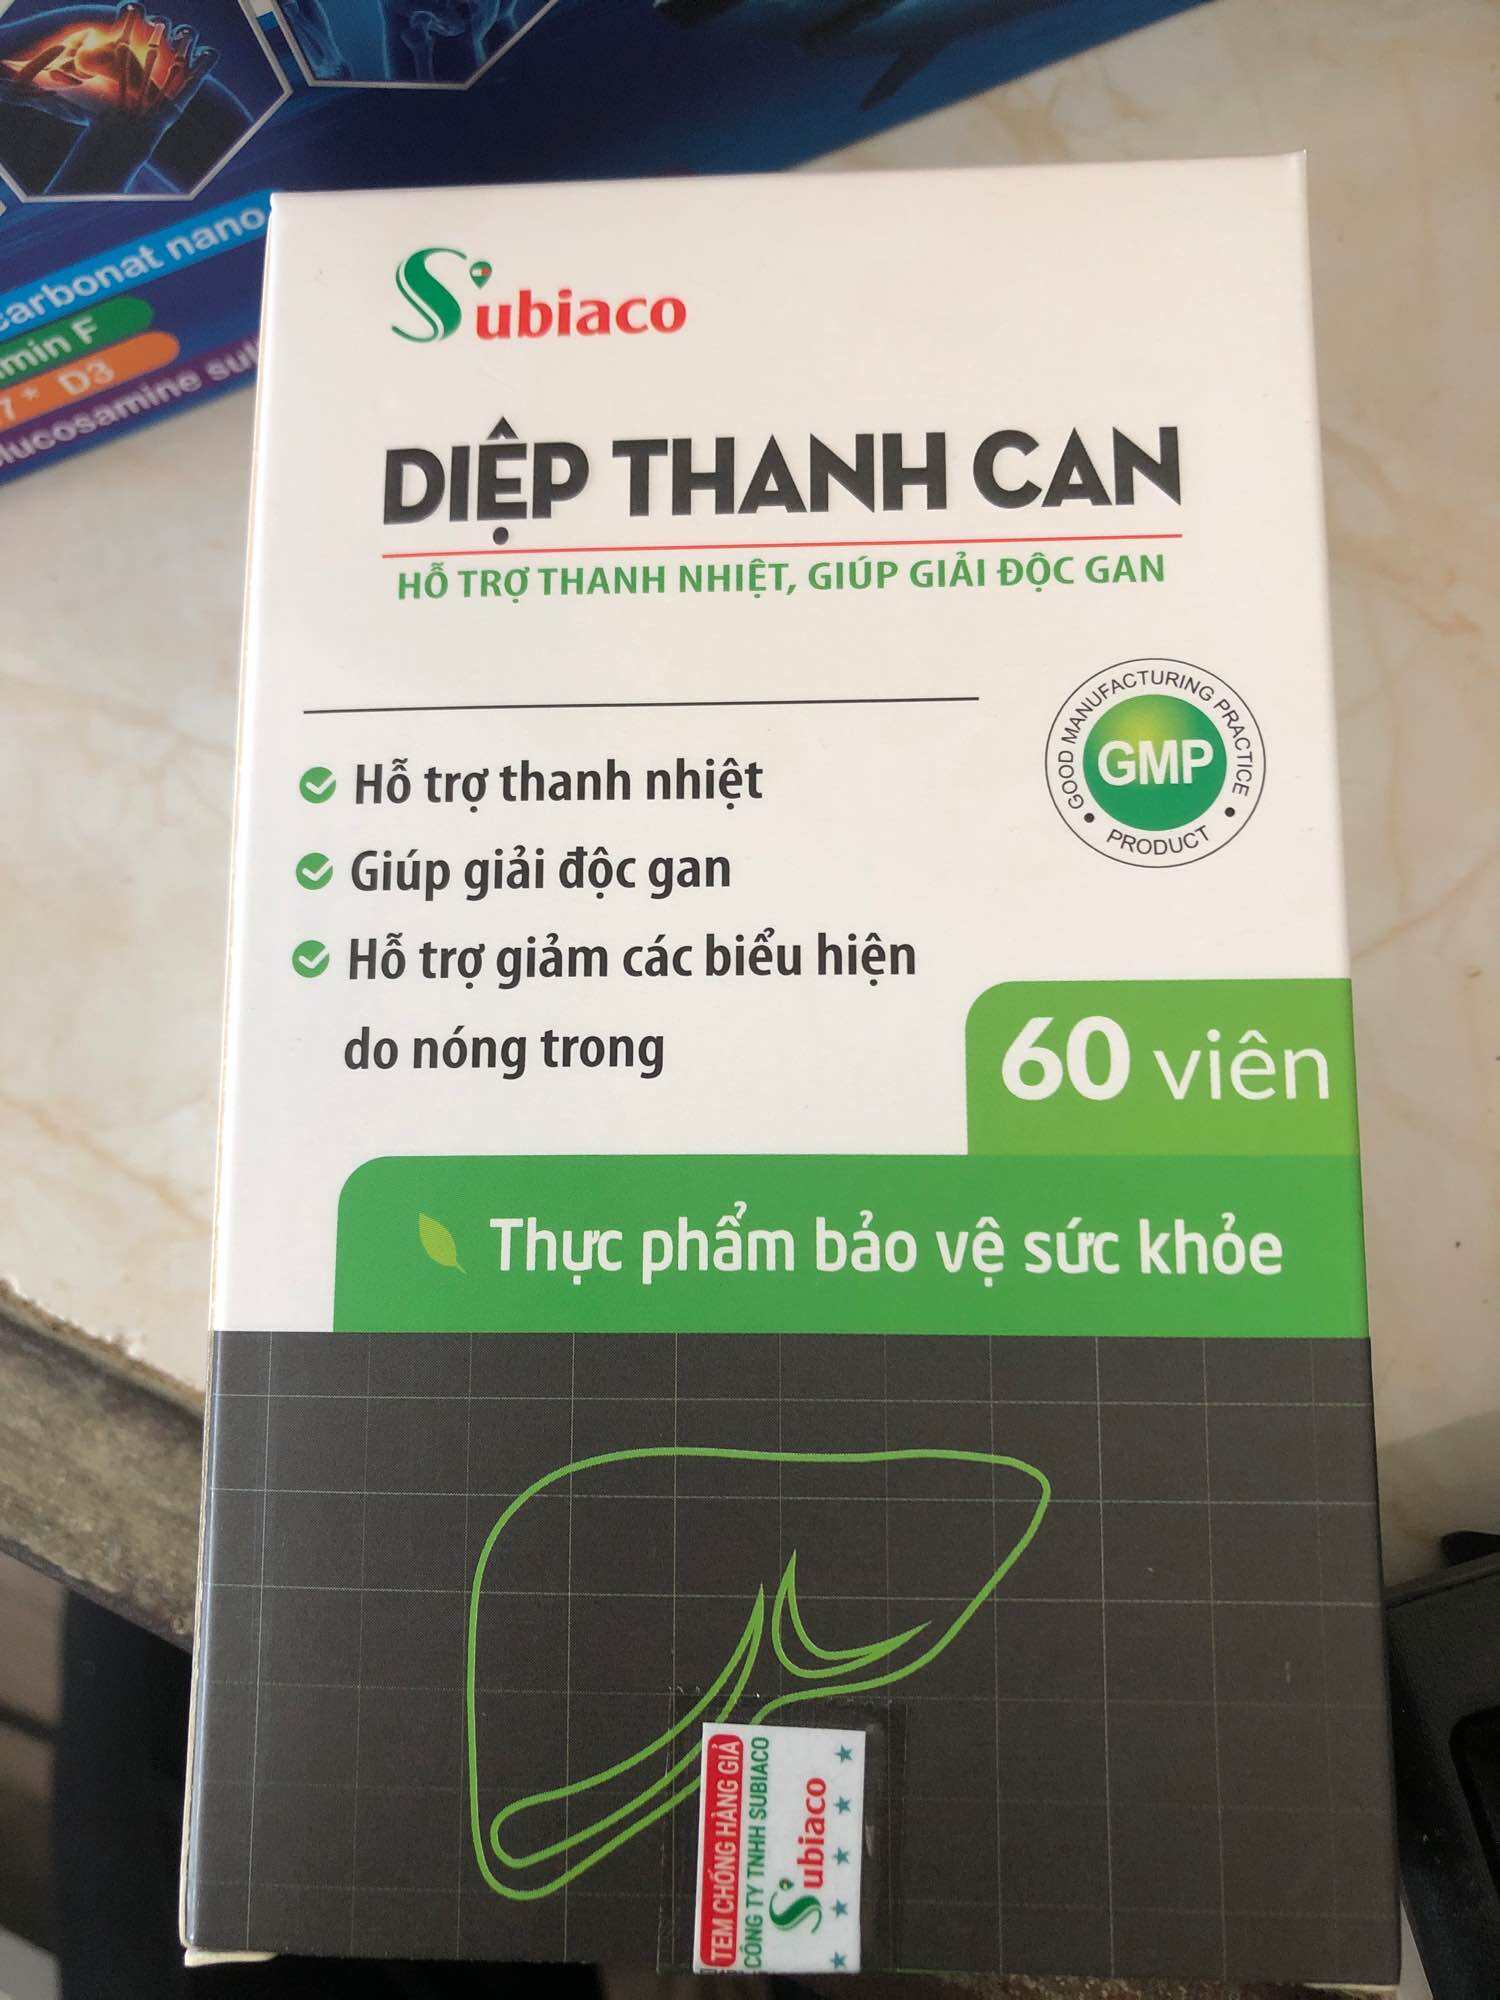 Diệp thanh can